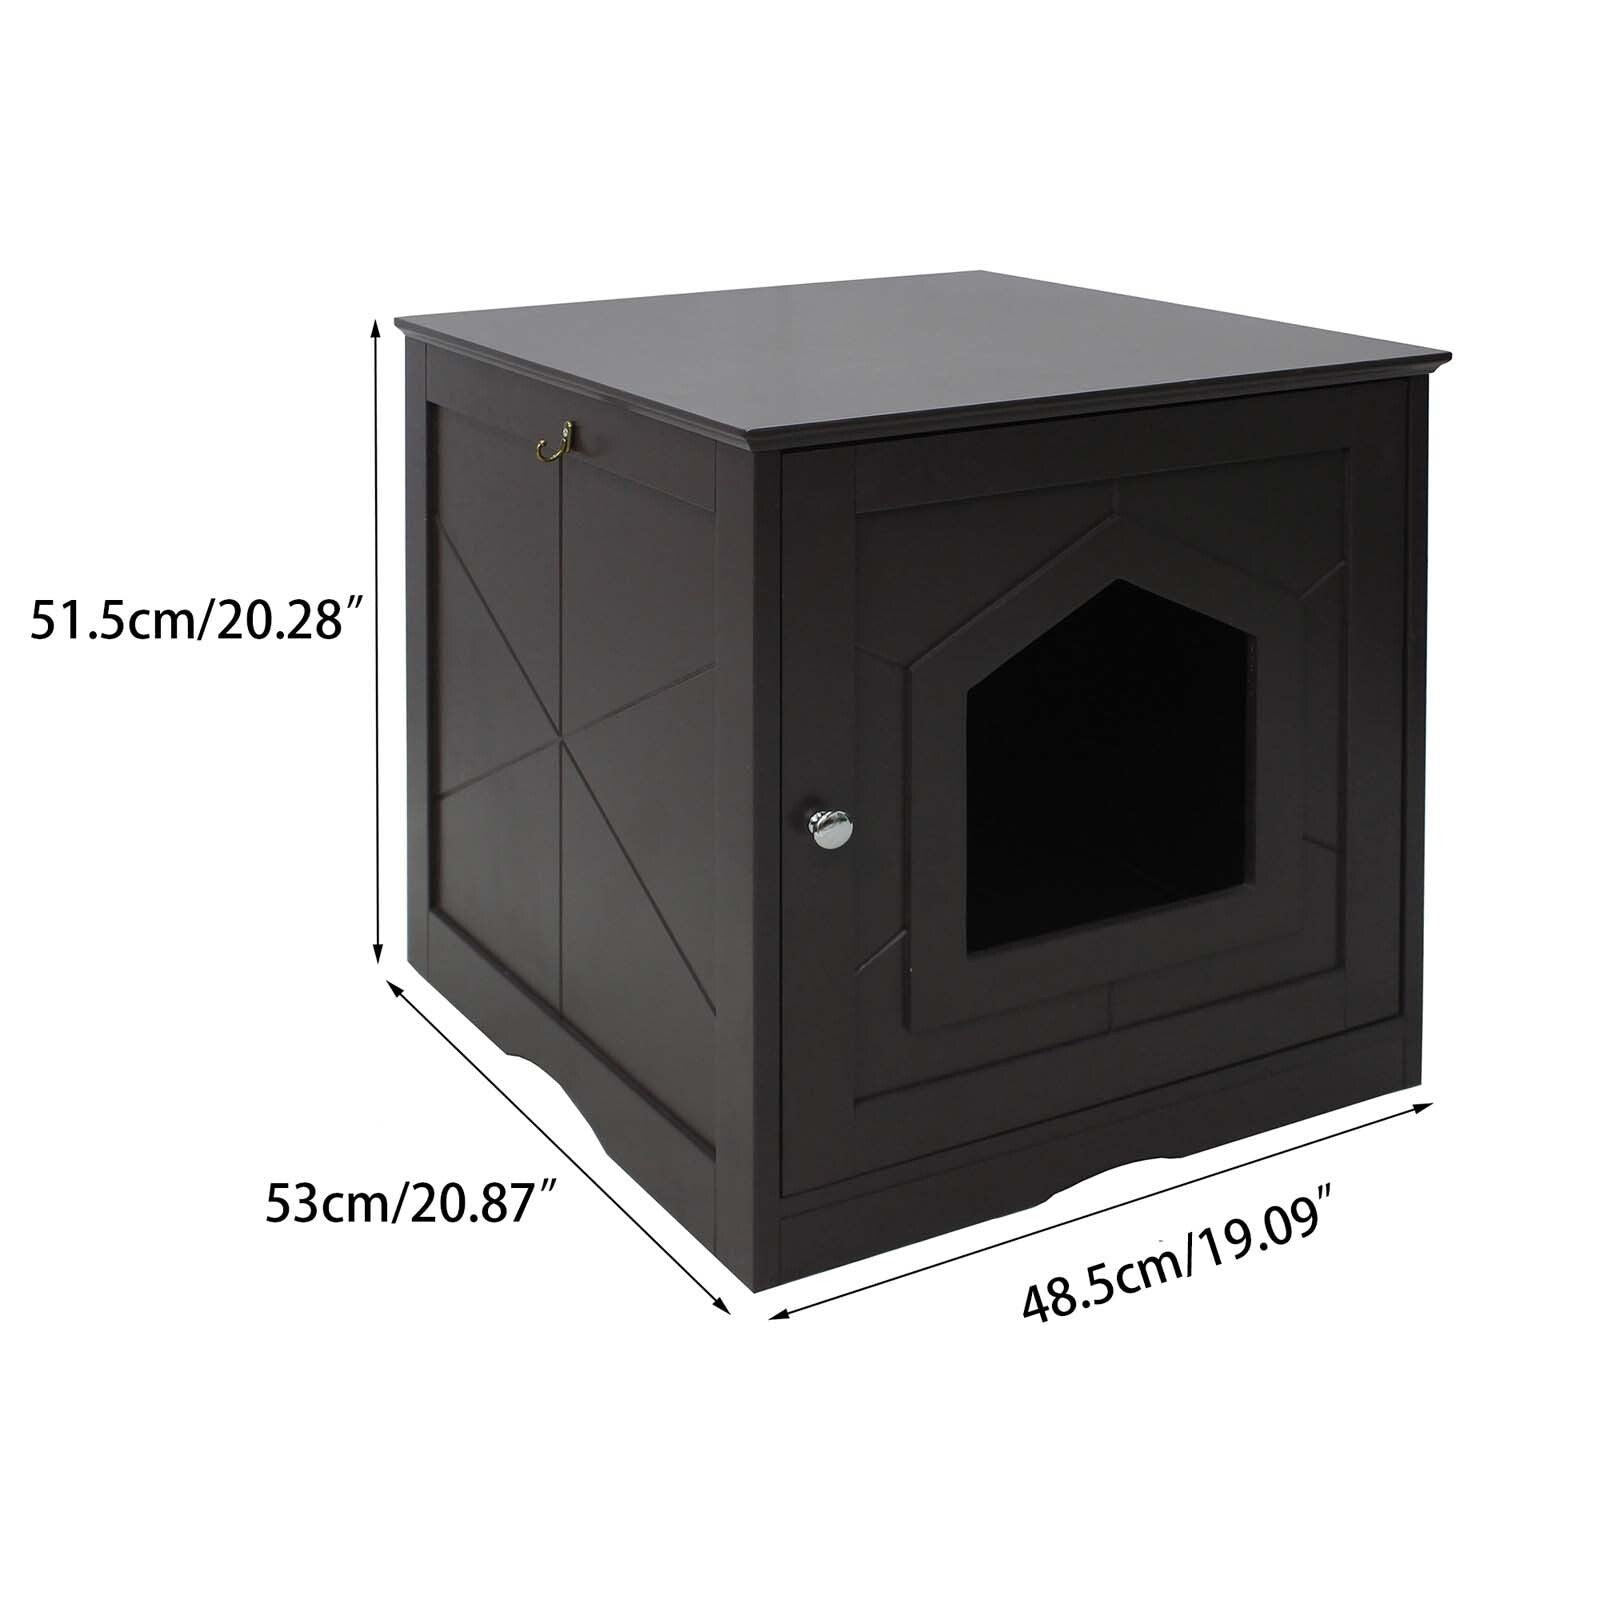 WEIKABU Wooden Indoor Cat Litter Box Enclosure, Cat House & Side Table, Cat Home Furniture Nightstand, Brown